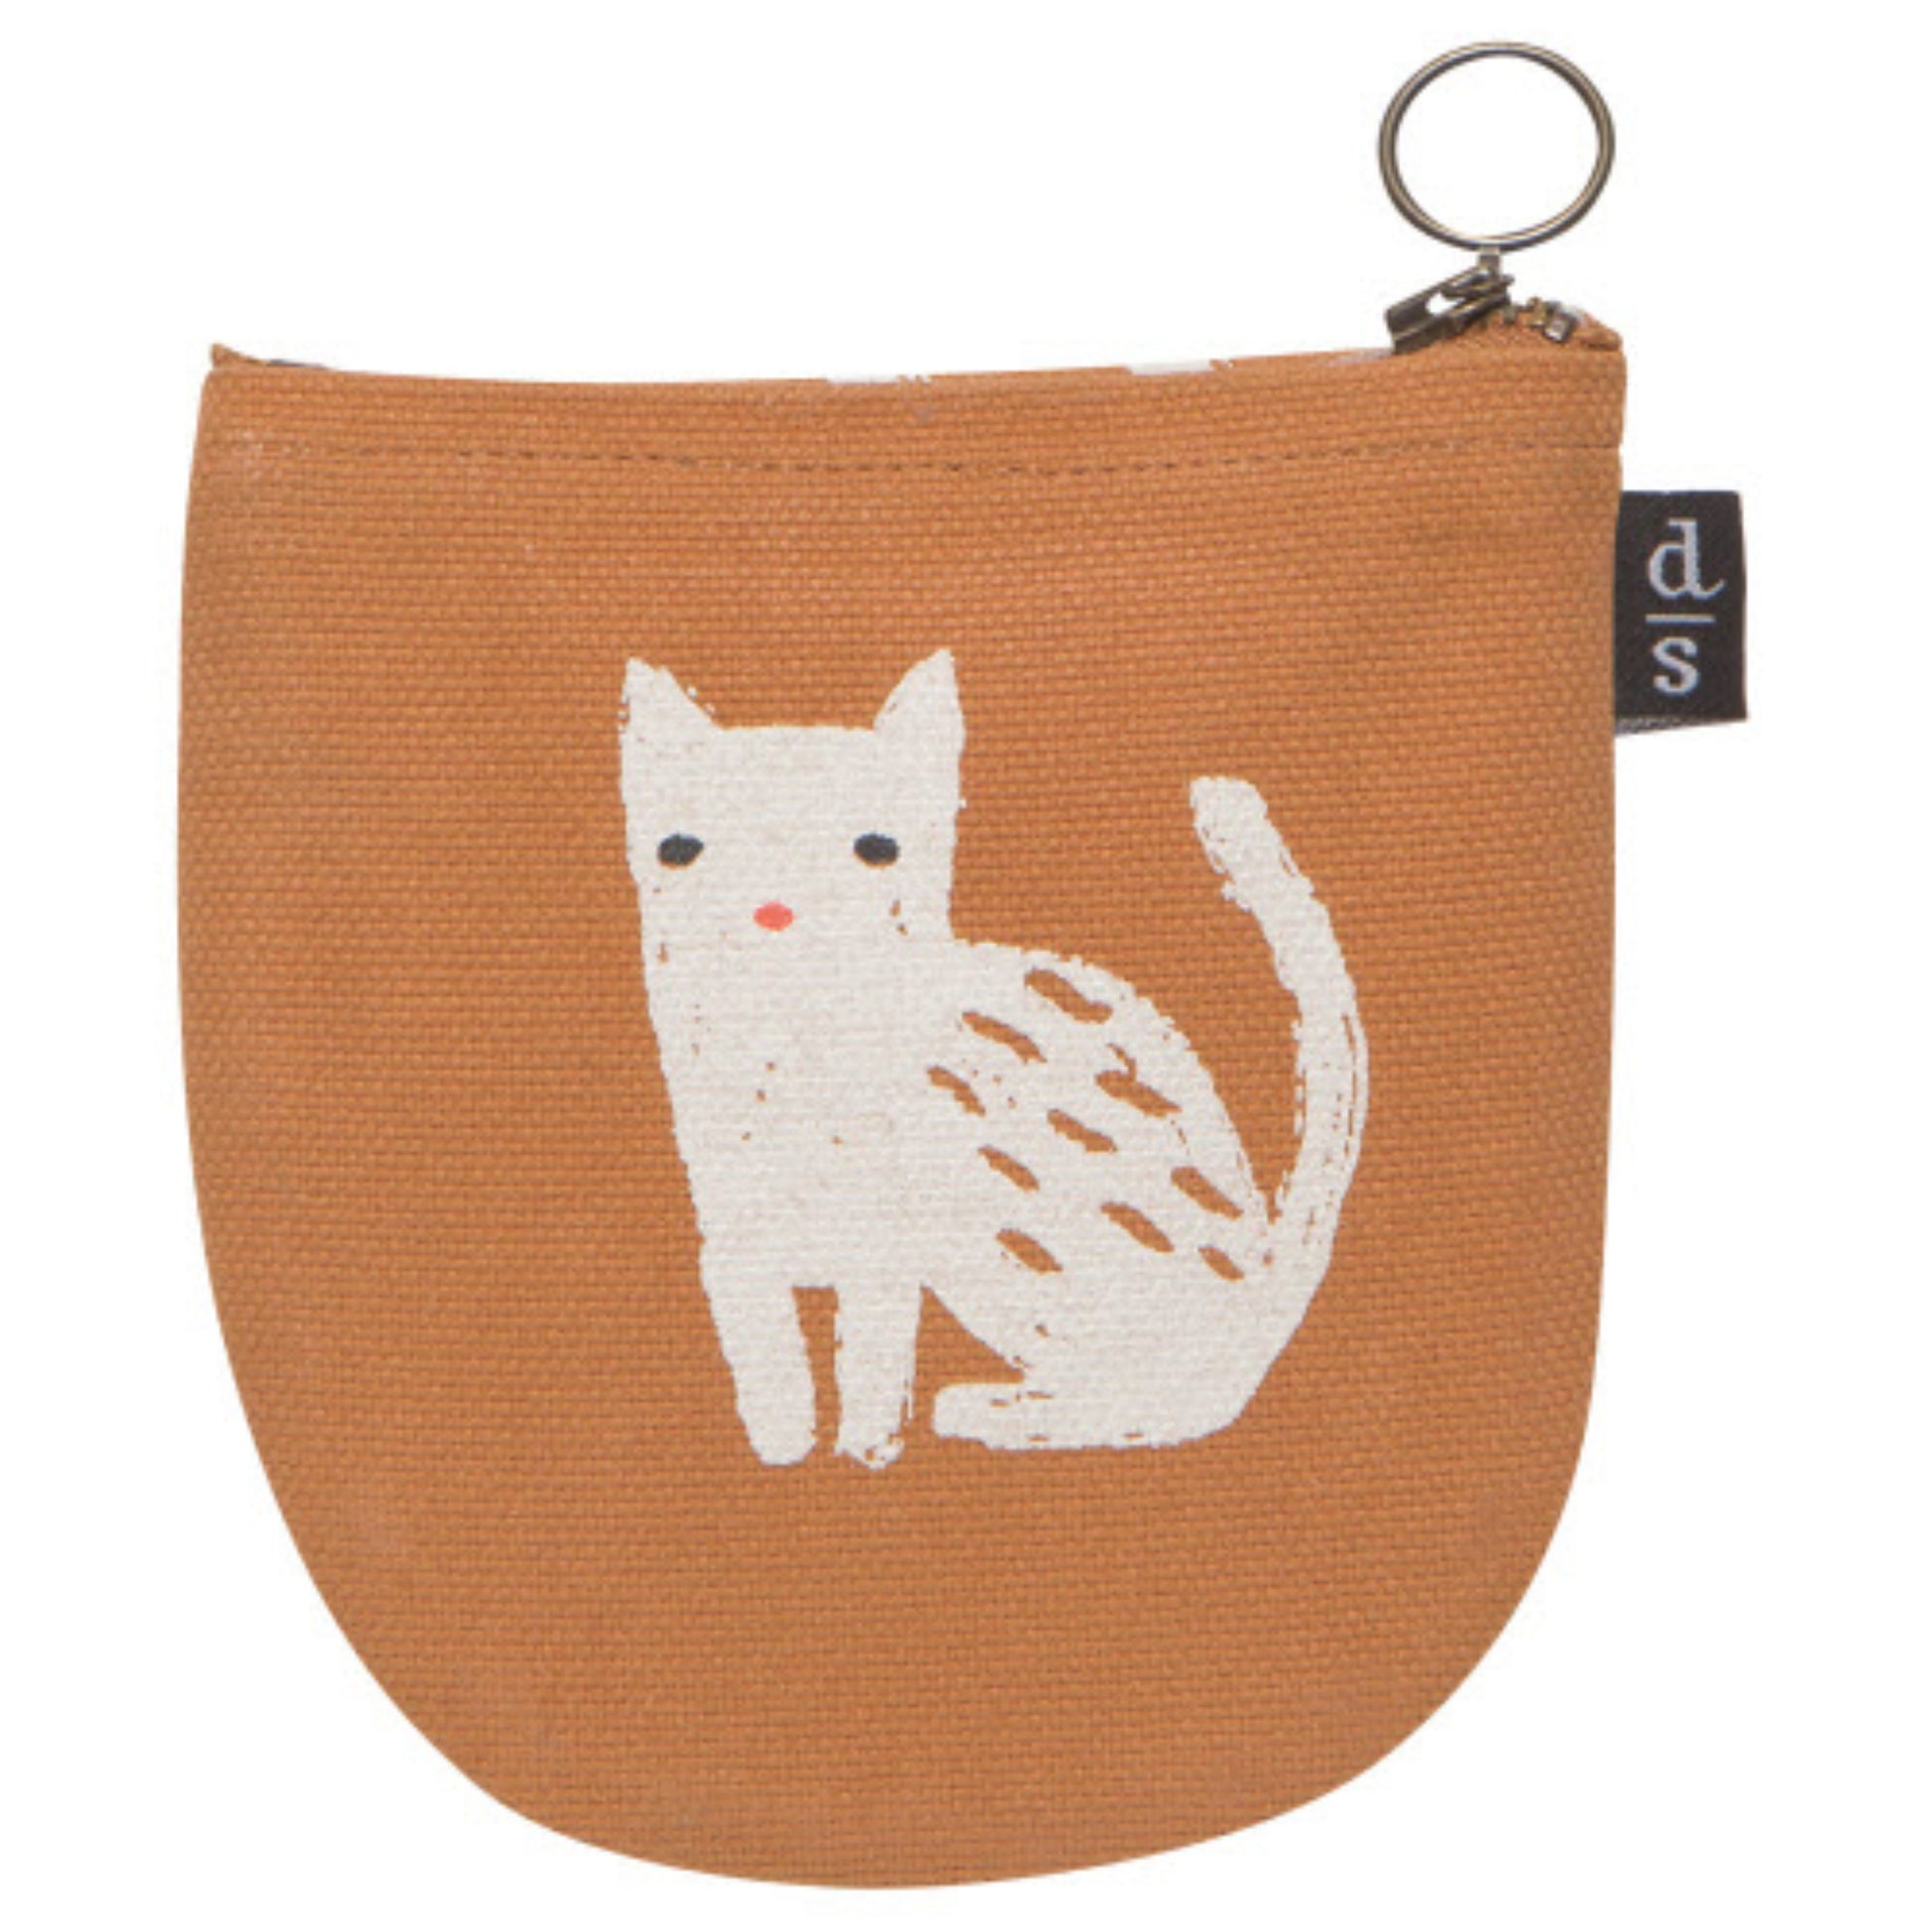 "The Cats Meow": Halfmoon Pouch - Tiny Tiger Gift Shop